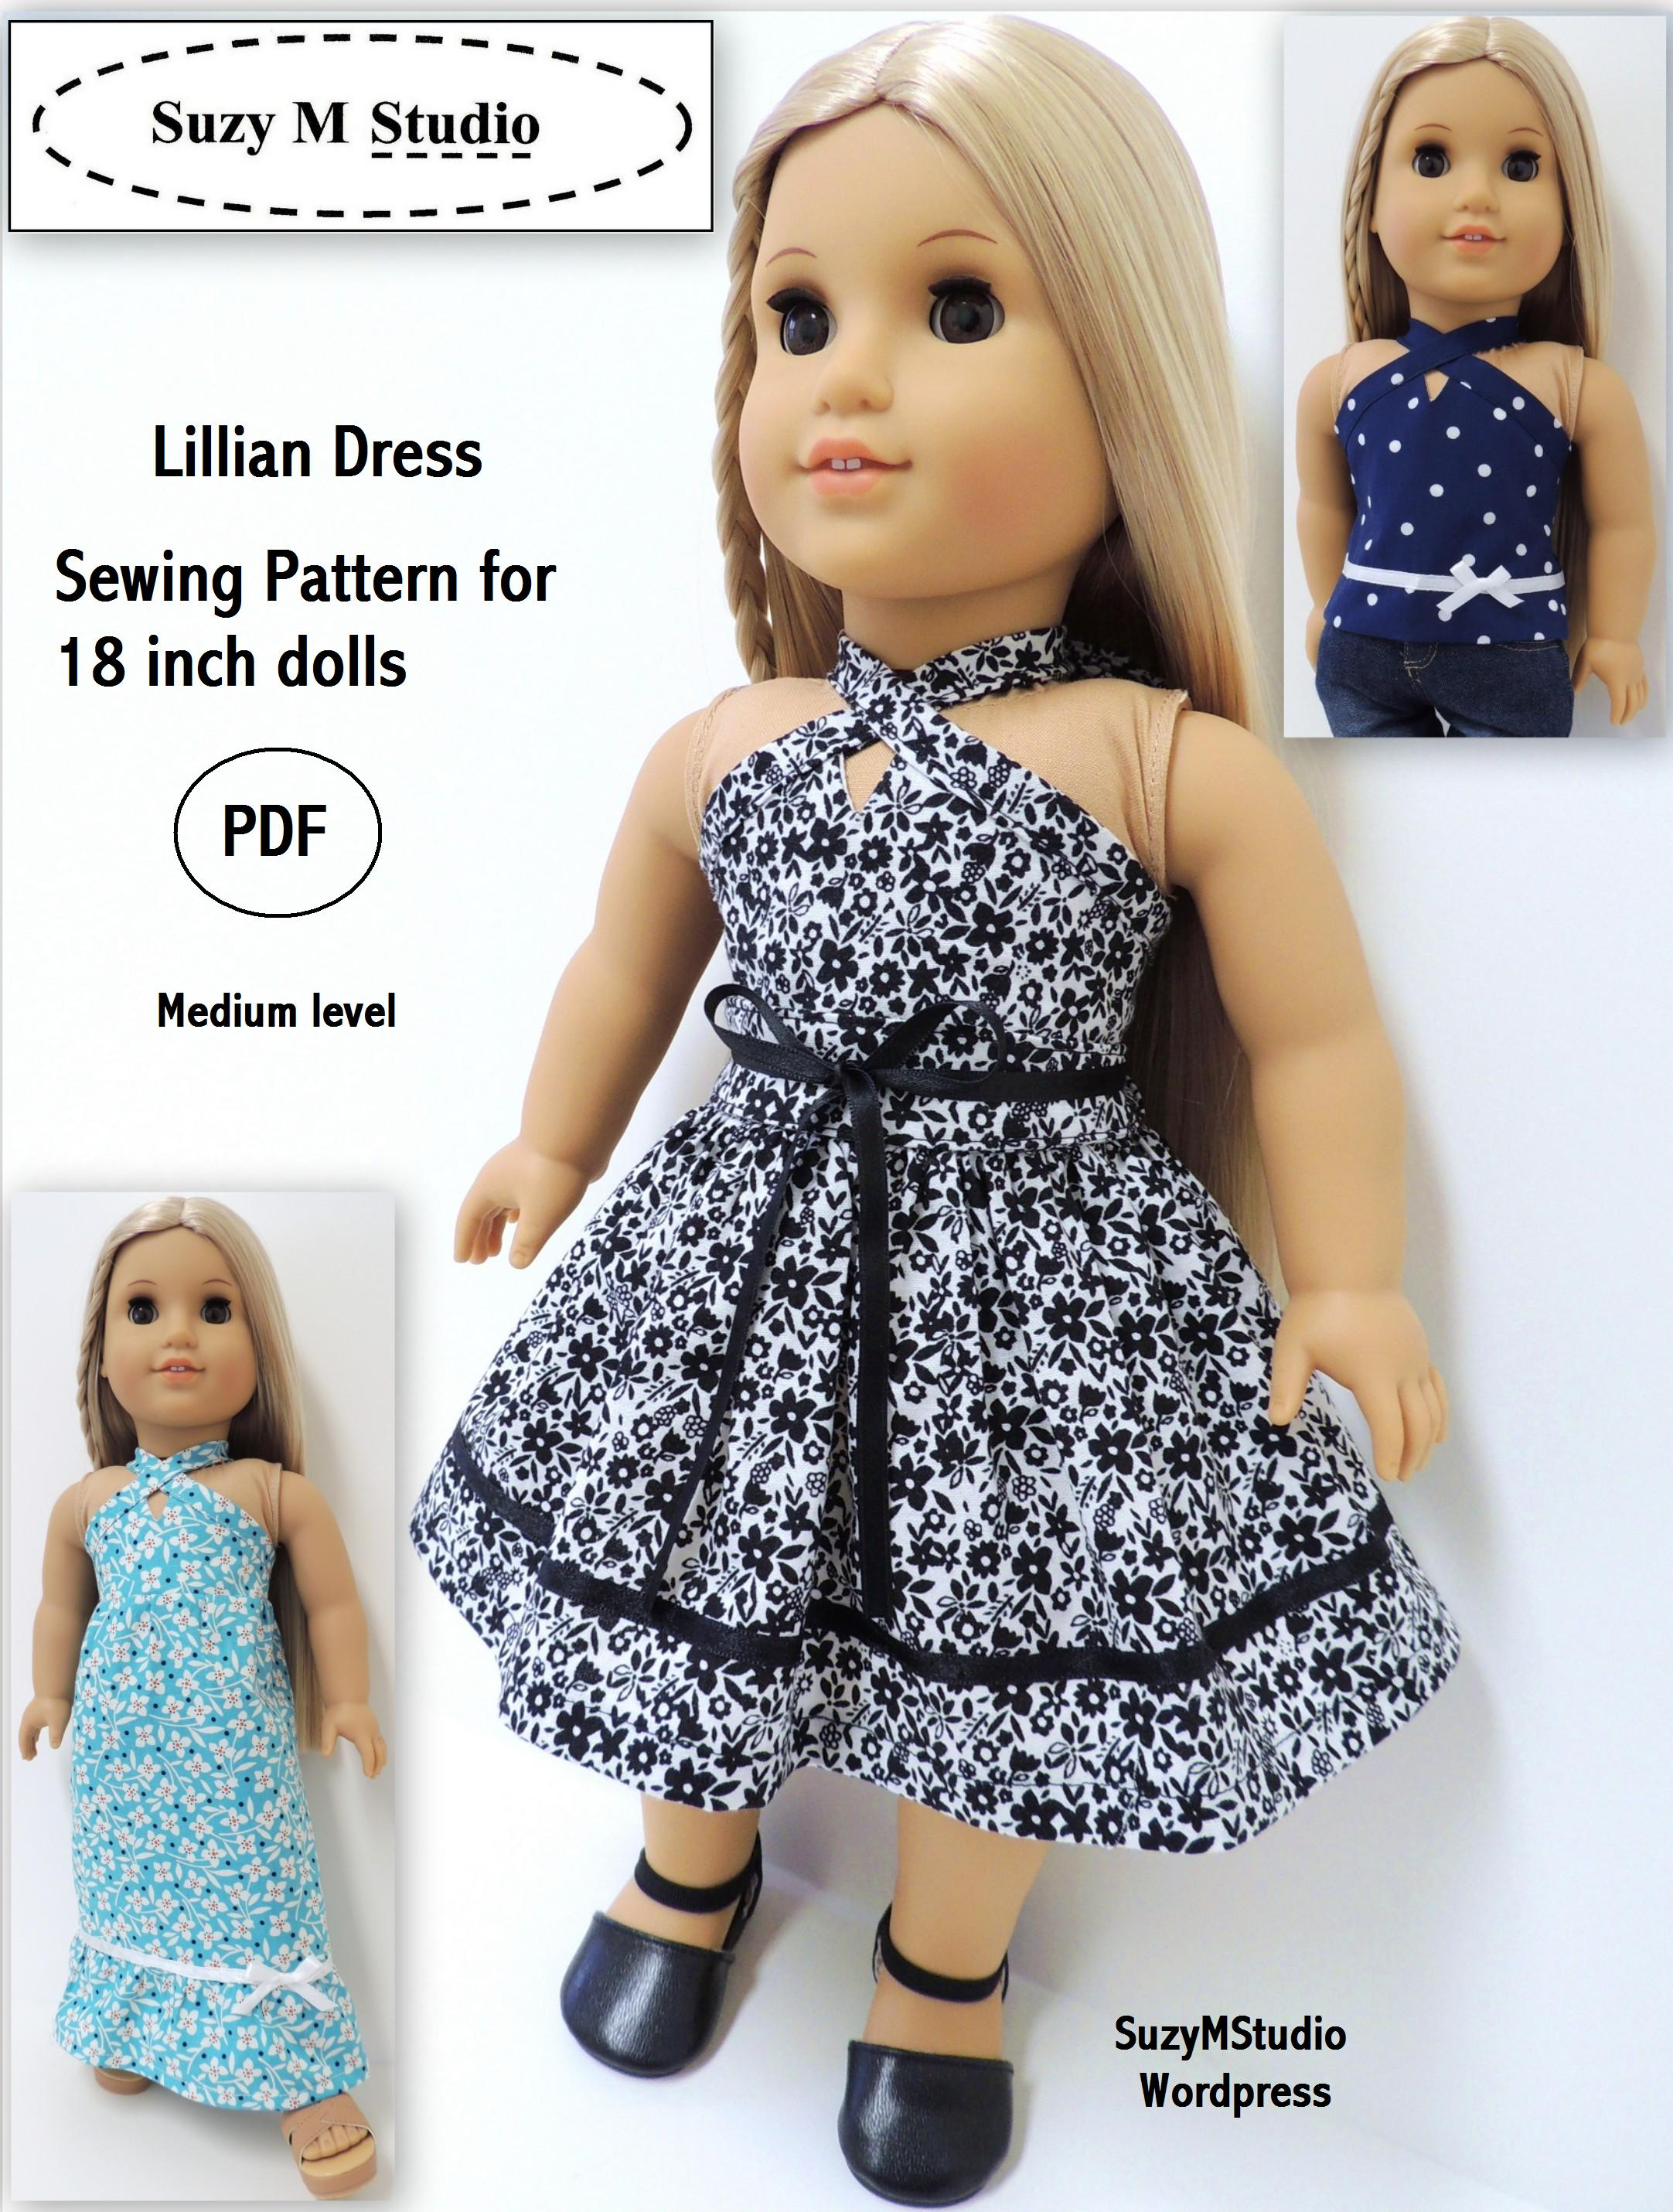 Suzymstudio | Doll Clothes And Sewing Patterns - Free Printable Crochet Doll Clothes Patterns For 18 Inch Dolls